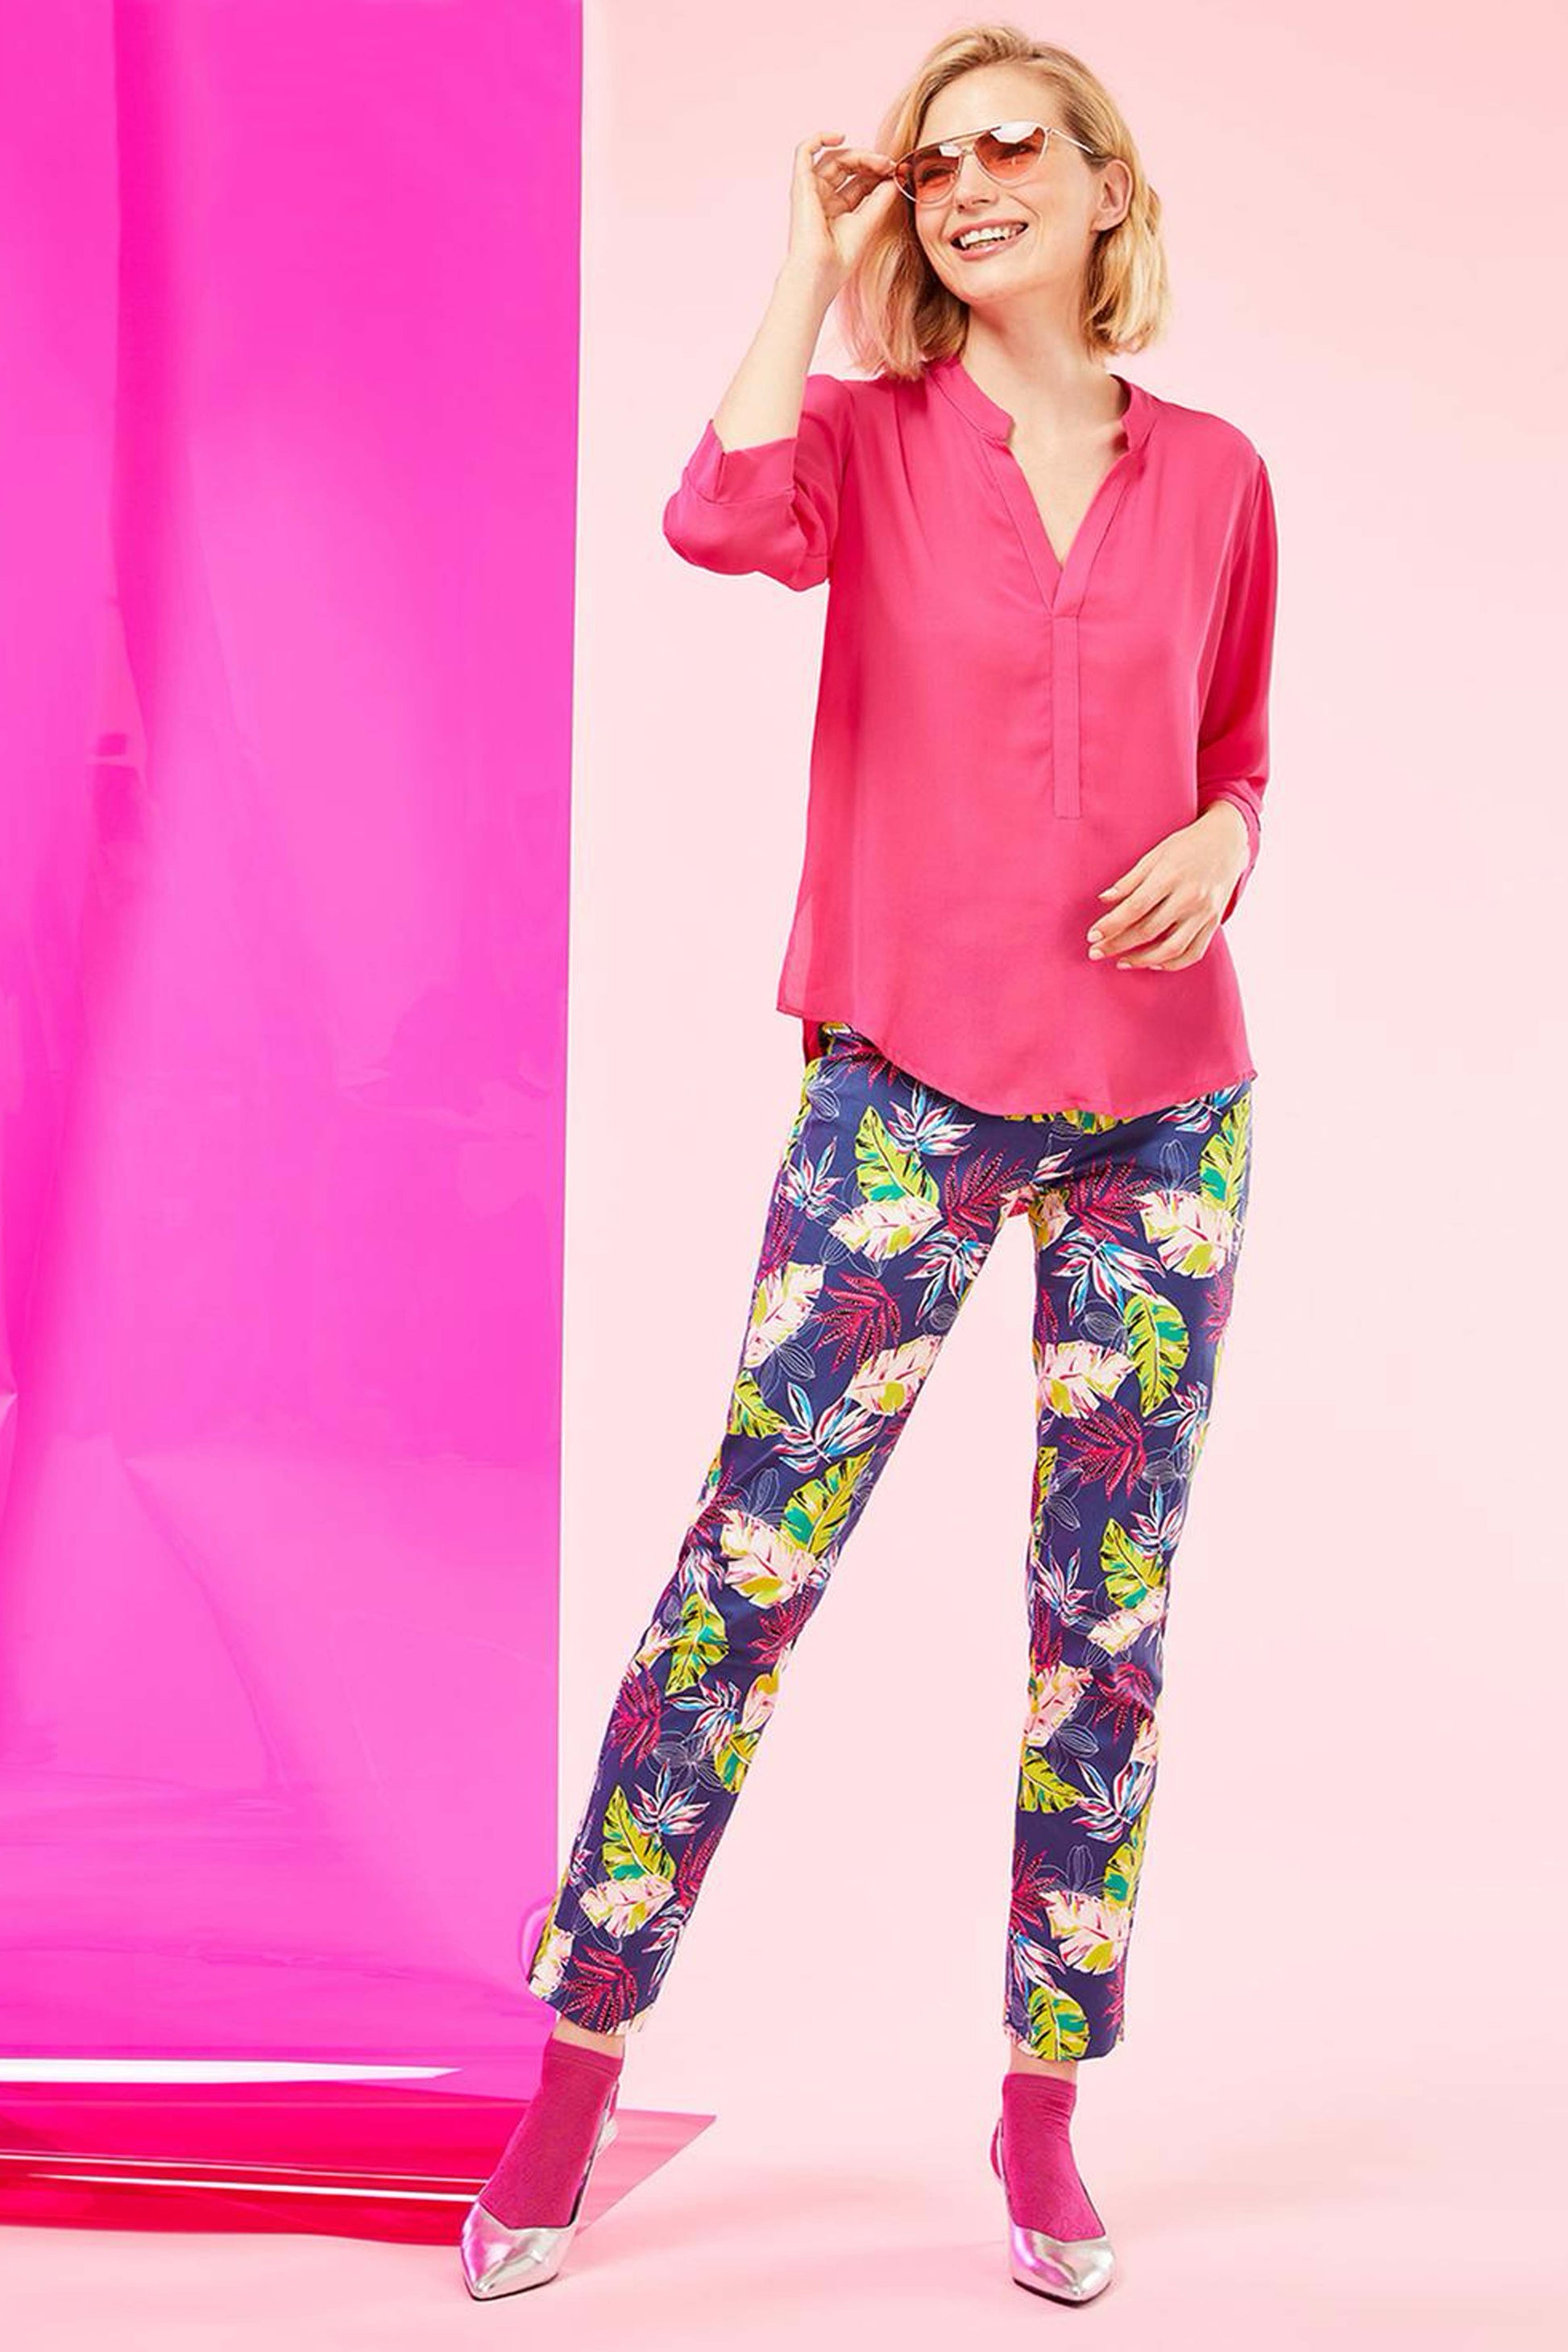 SiSi Tropical Treggings - Navy blue cotton stretch trousers with a tropical leaf style pattern in shades of pink, blue, purple and lime green, button and zipper closures, faux back pockets and side slits on the cuff. Worn with a pink blouse, pink socks and silver shoes.